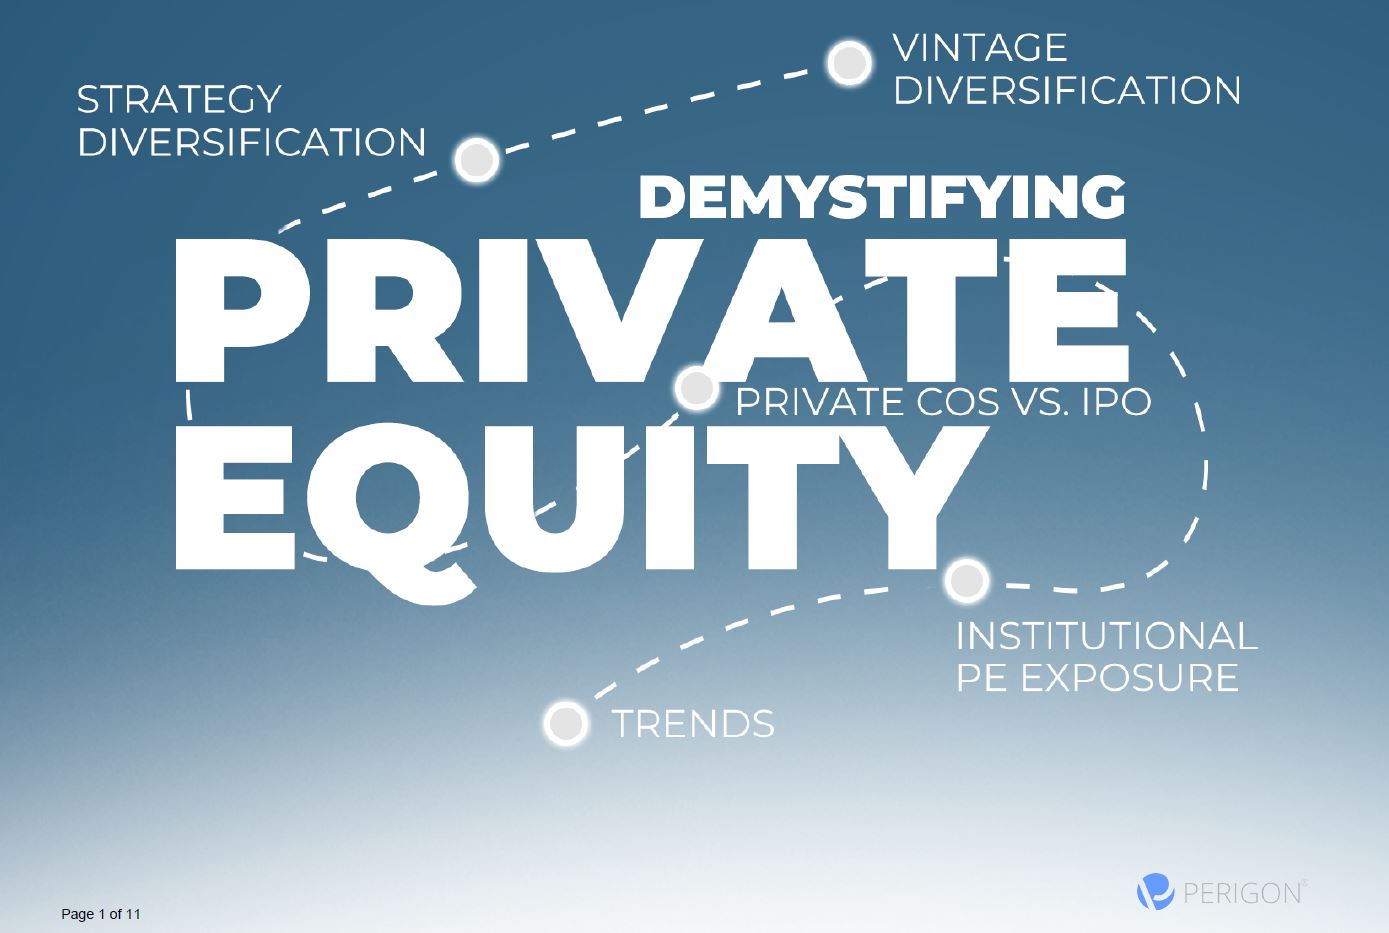 Demystifying Private Equity